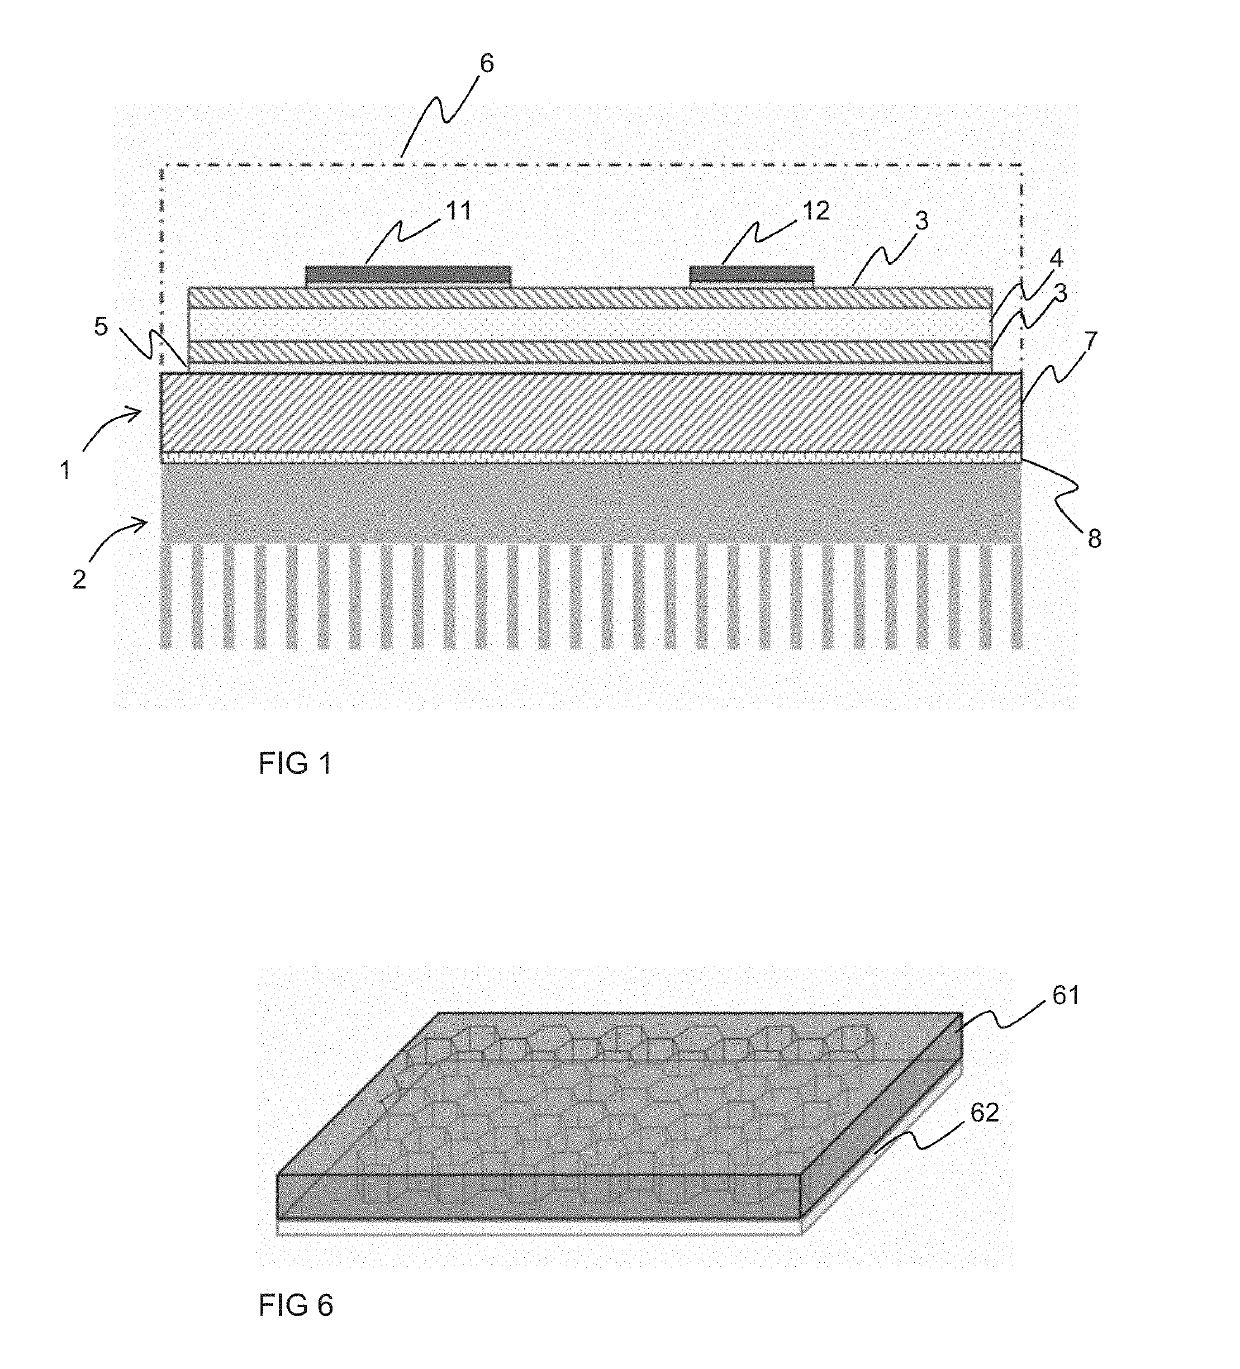 Power electronics module and a method of producing a power electronics module